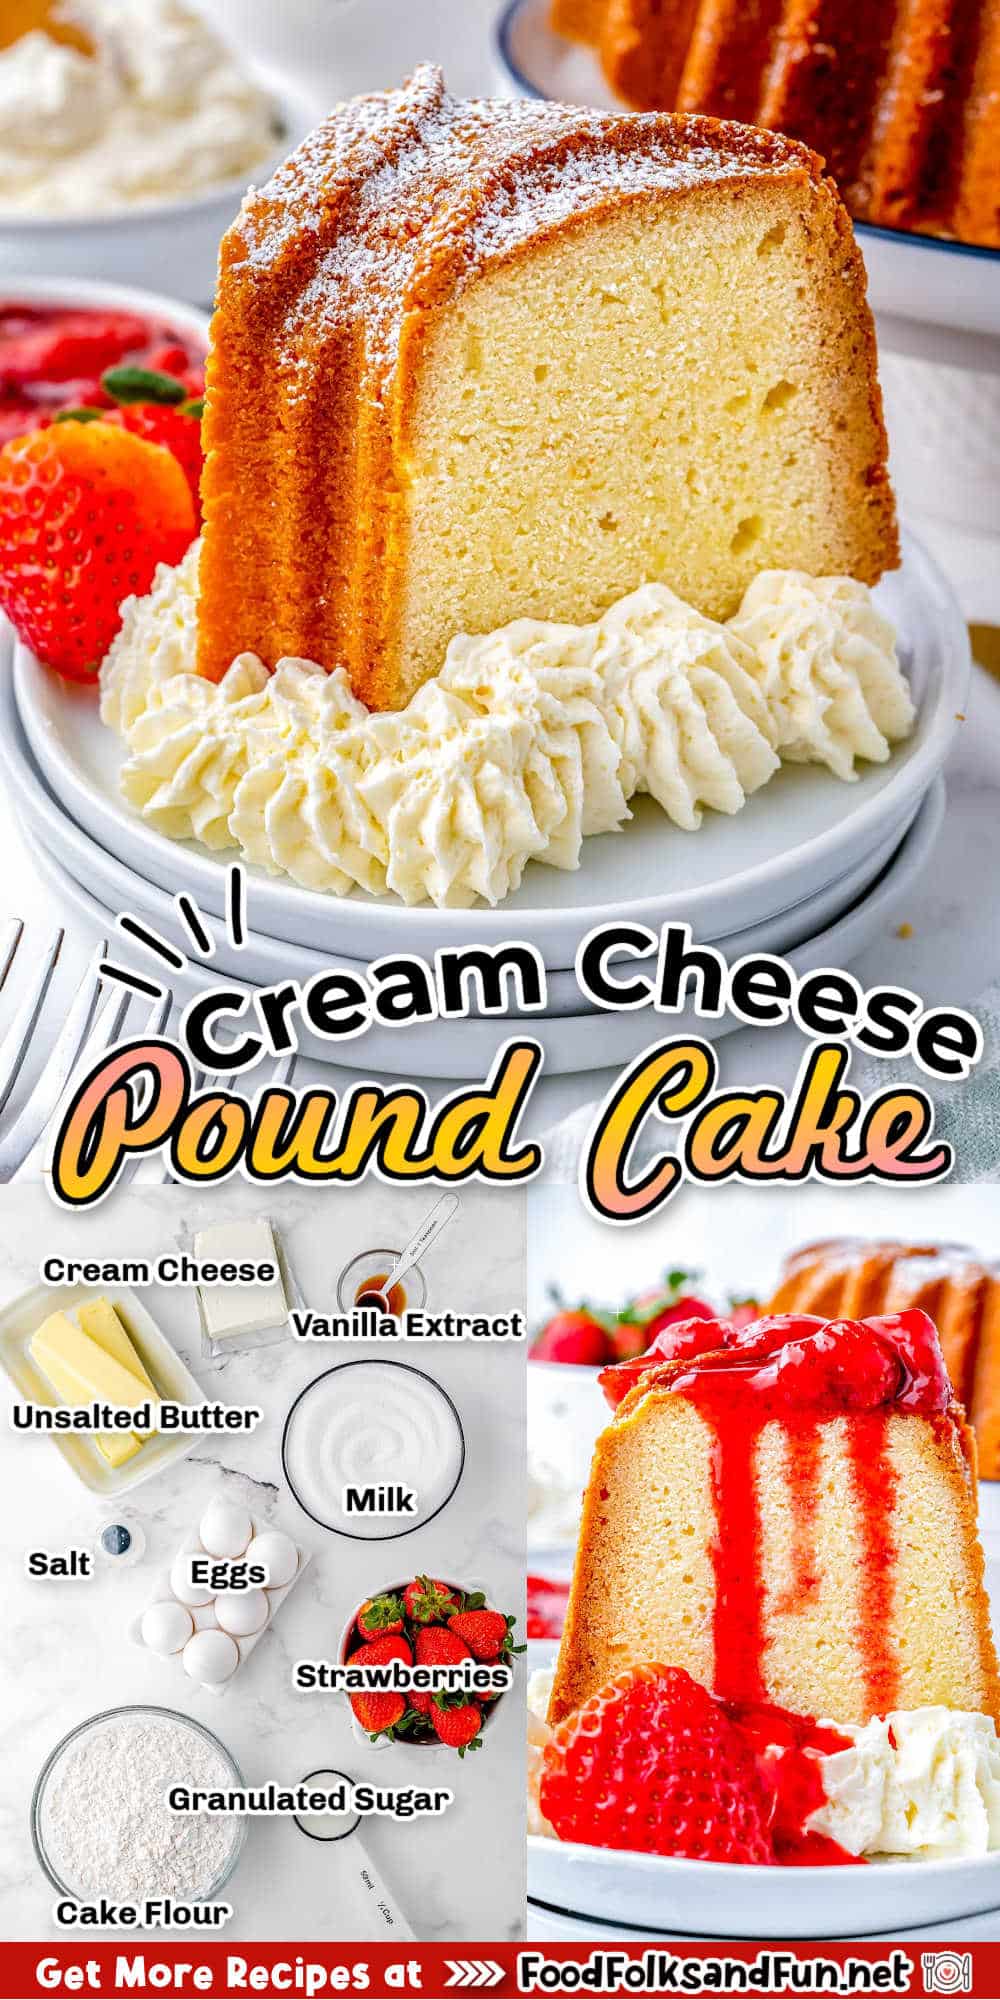 Indulge in the rich and velvety delight of Cream Cheese Pound Cake. Serve it with the Strawberry Topping to make it irresistible! via @foodfolksandfun